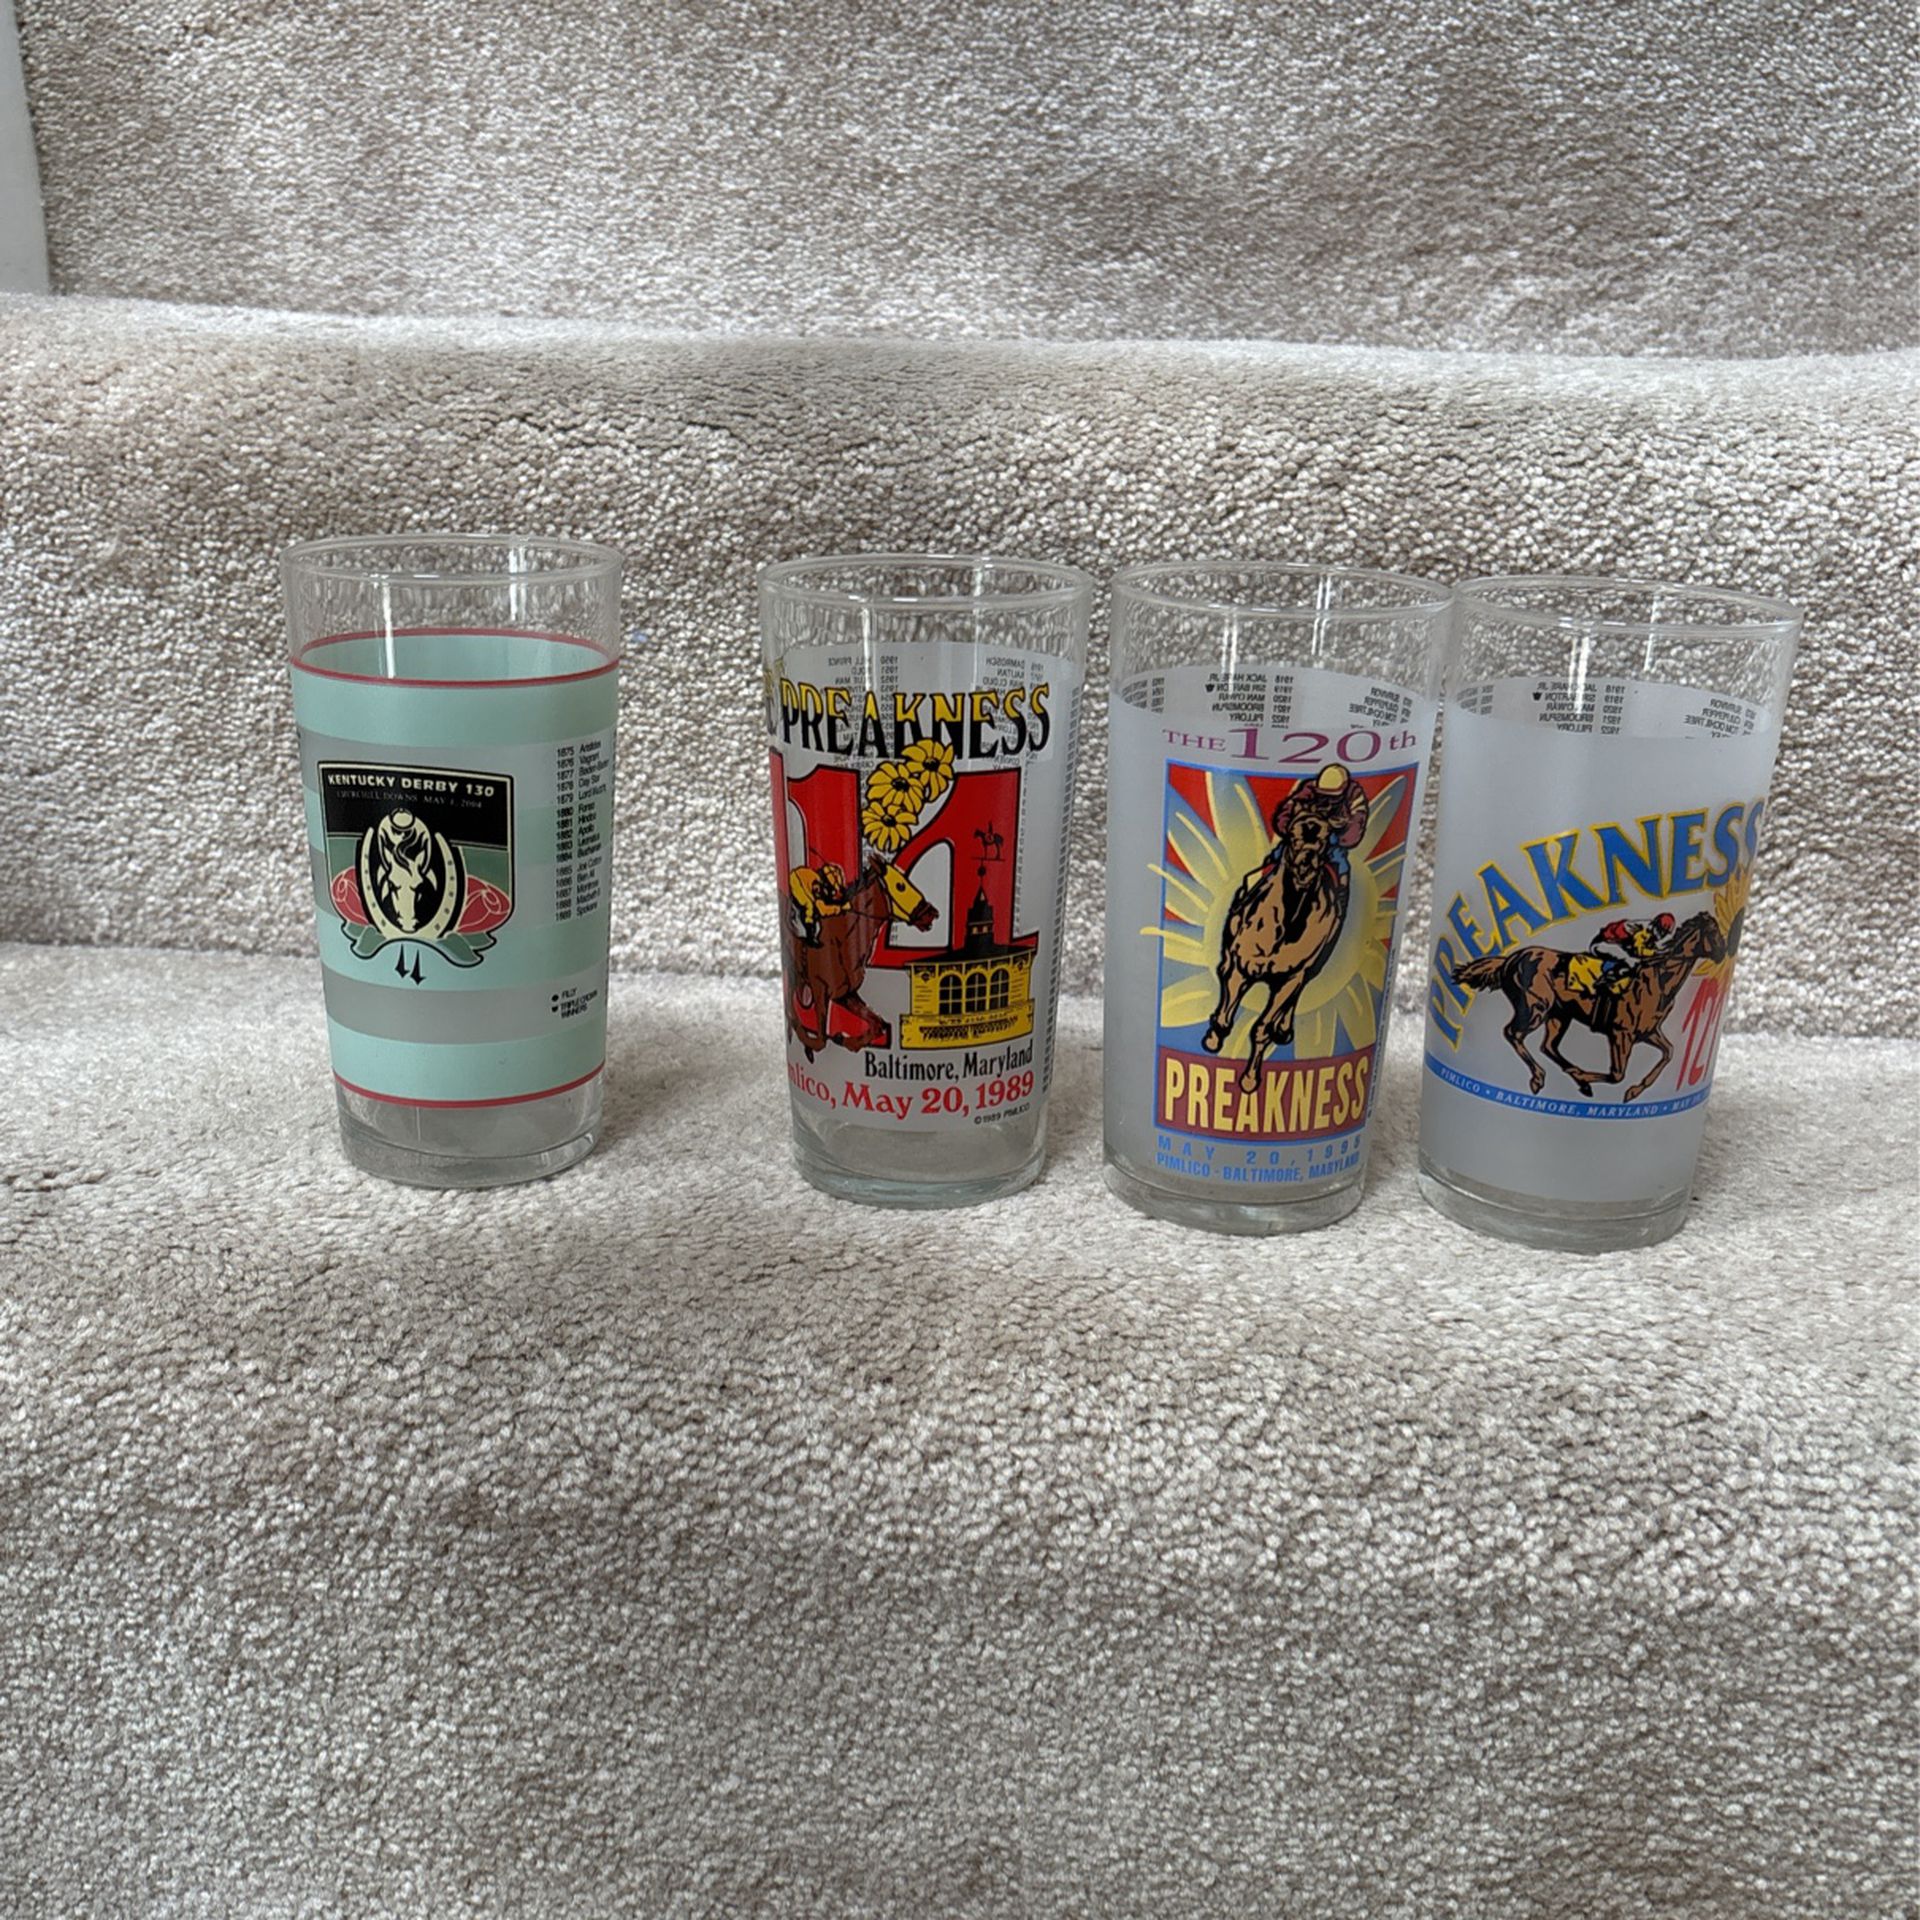 “REDUCED” Preakness Glasses 1989, 1995, 1996 and Kentucky Derby Glass 2004 